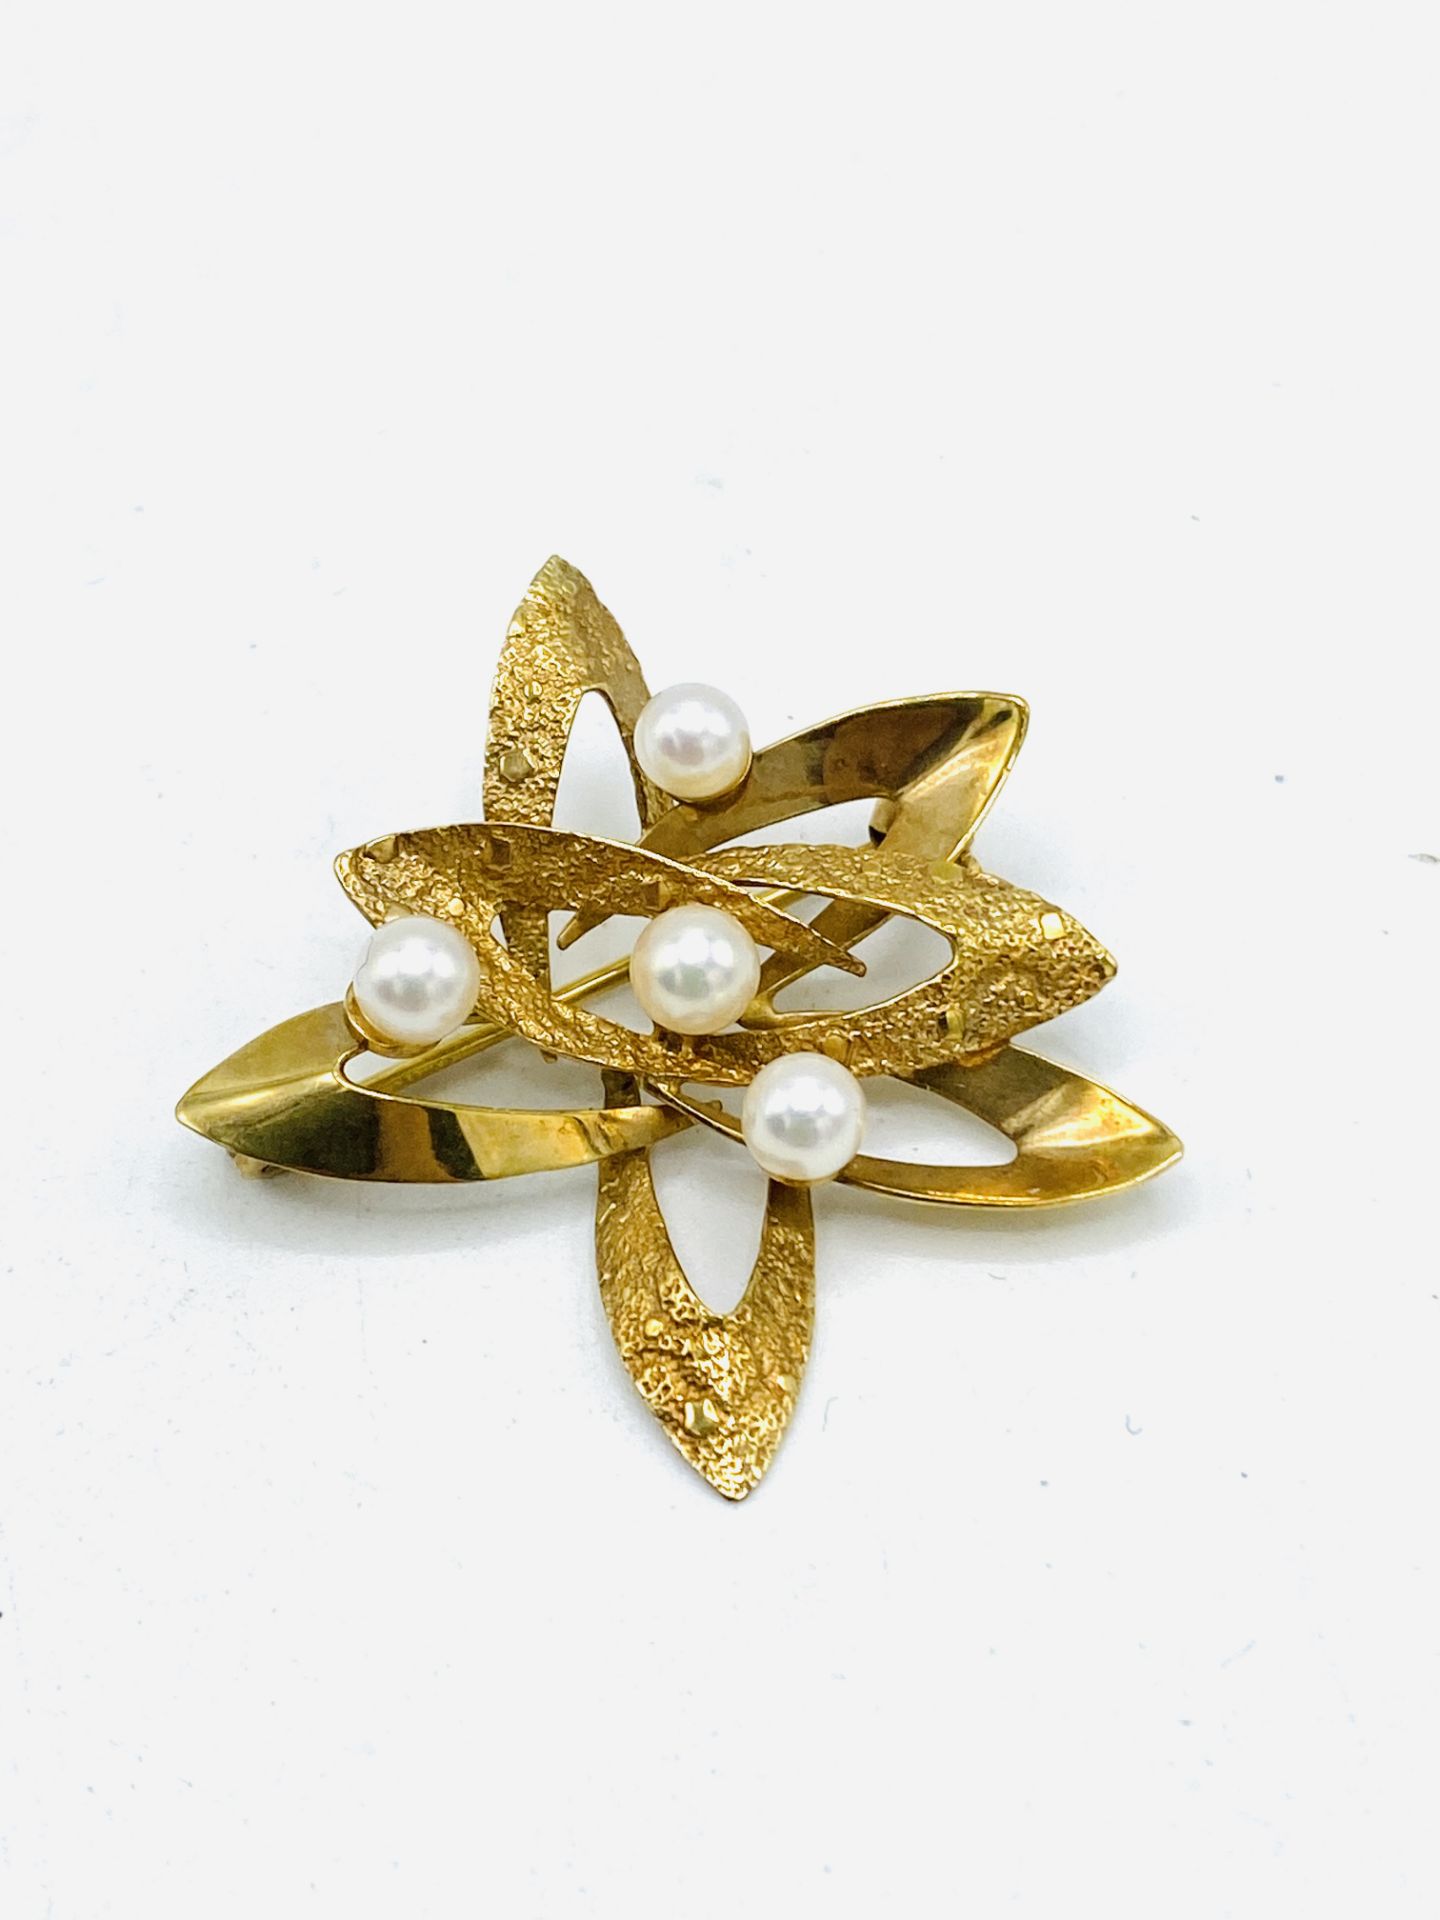 9ct gold brooch set with pearls - Image 4 of 5